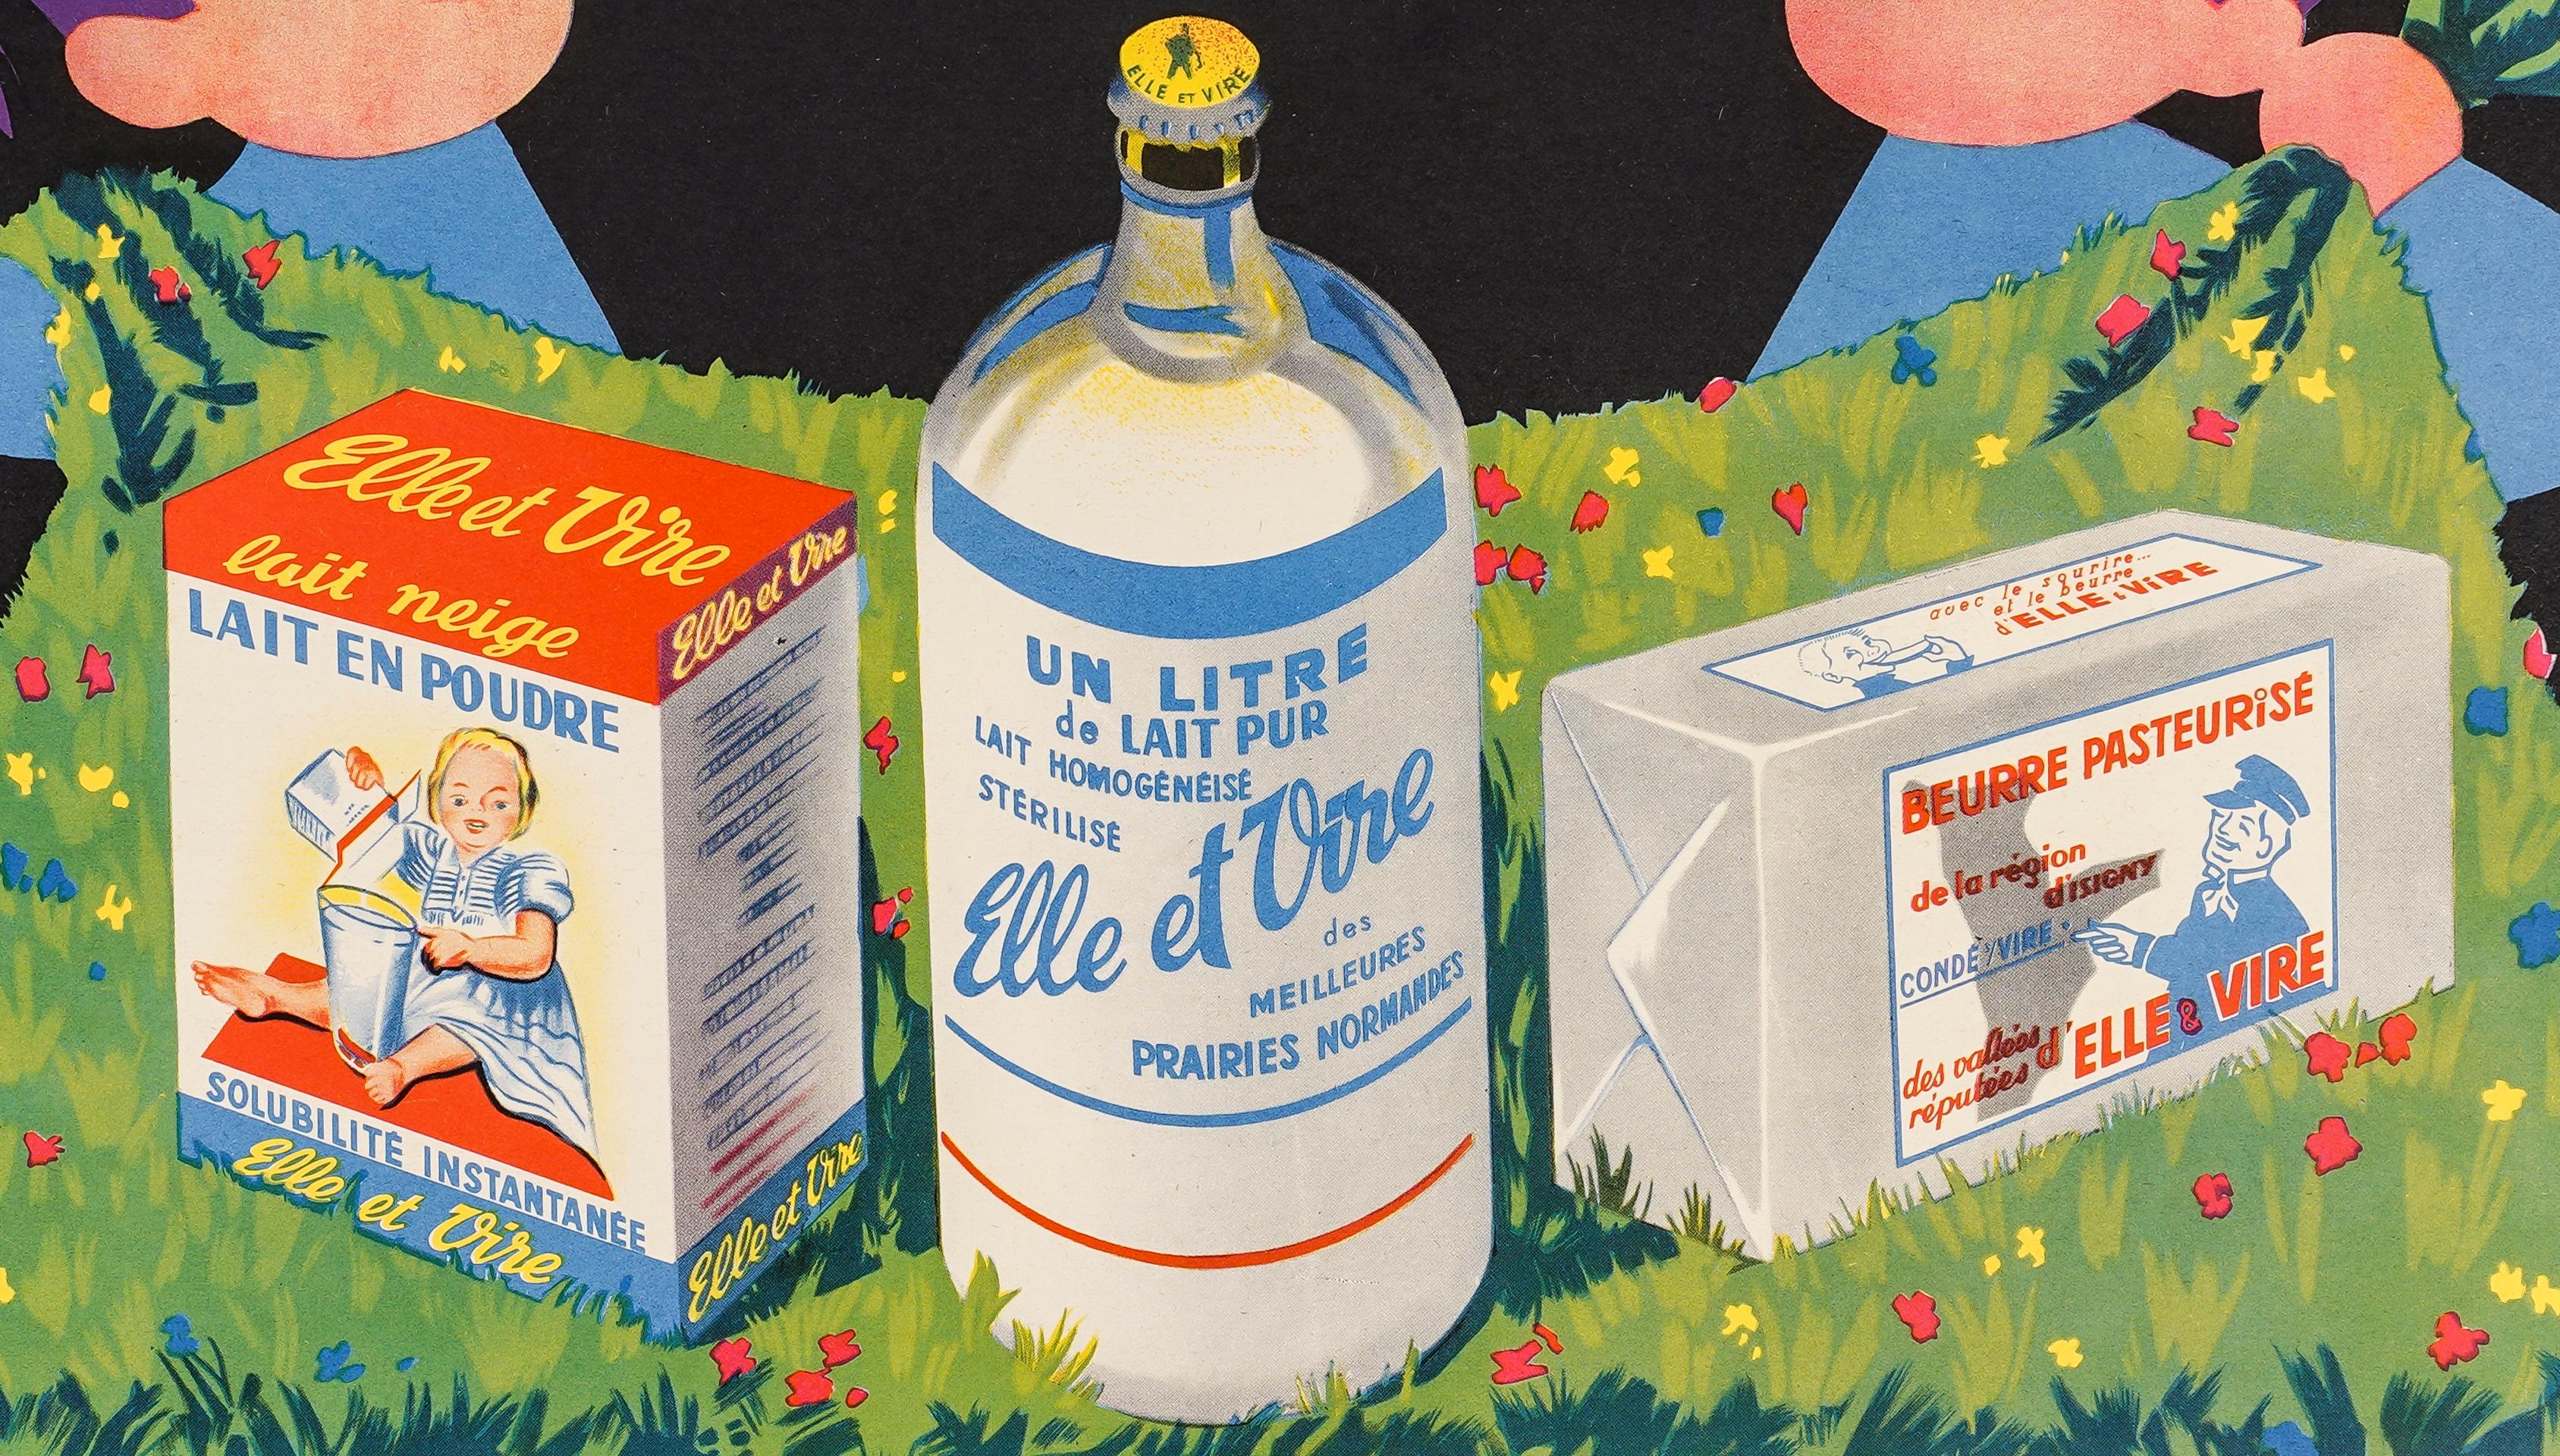 French Roland, Original Food Poster, Elle et Vire, Butter Milk Flowers Countryside 1960 For Sale